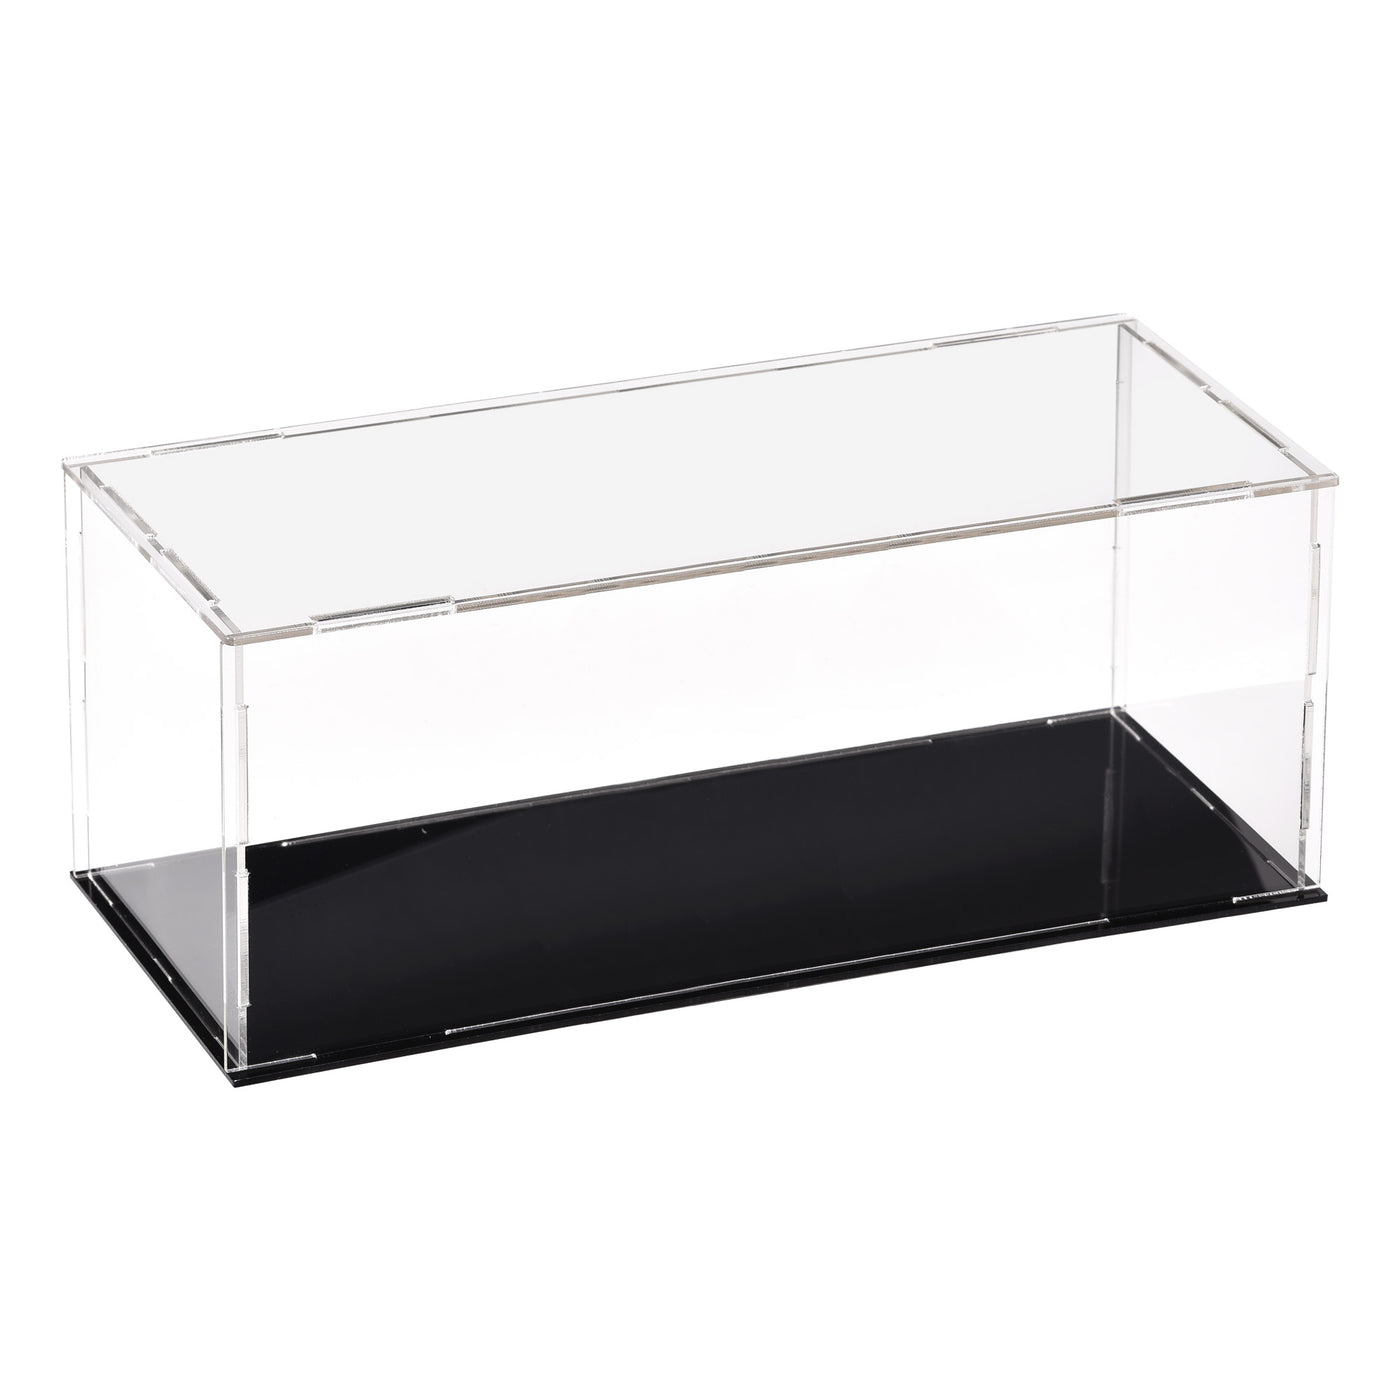 uxcell Uxcell Acrylic Display Case Dustproof Protection Showcase Cube Collectibles Show Box